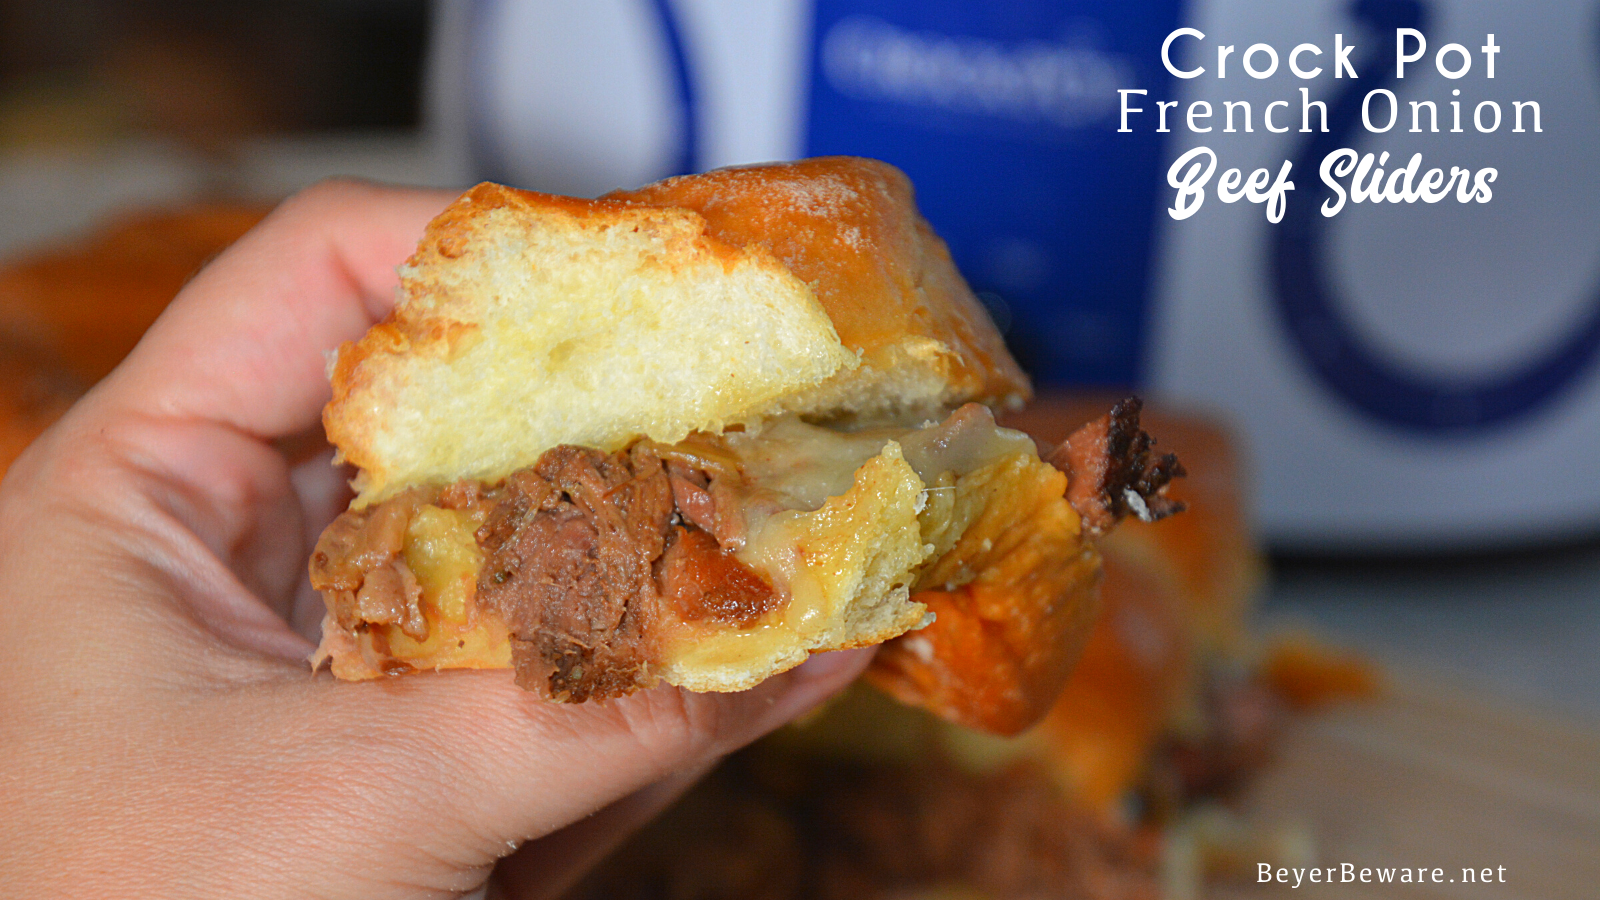 Crock Pot French onion beef sliders recipe is a shredded French onion beef roast made with canned French onion soup, onions, butter and beef broth used to make cheesy sliders on Hawaiian rolls.